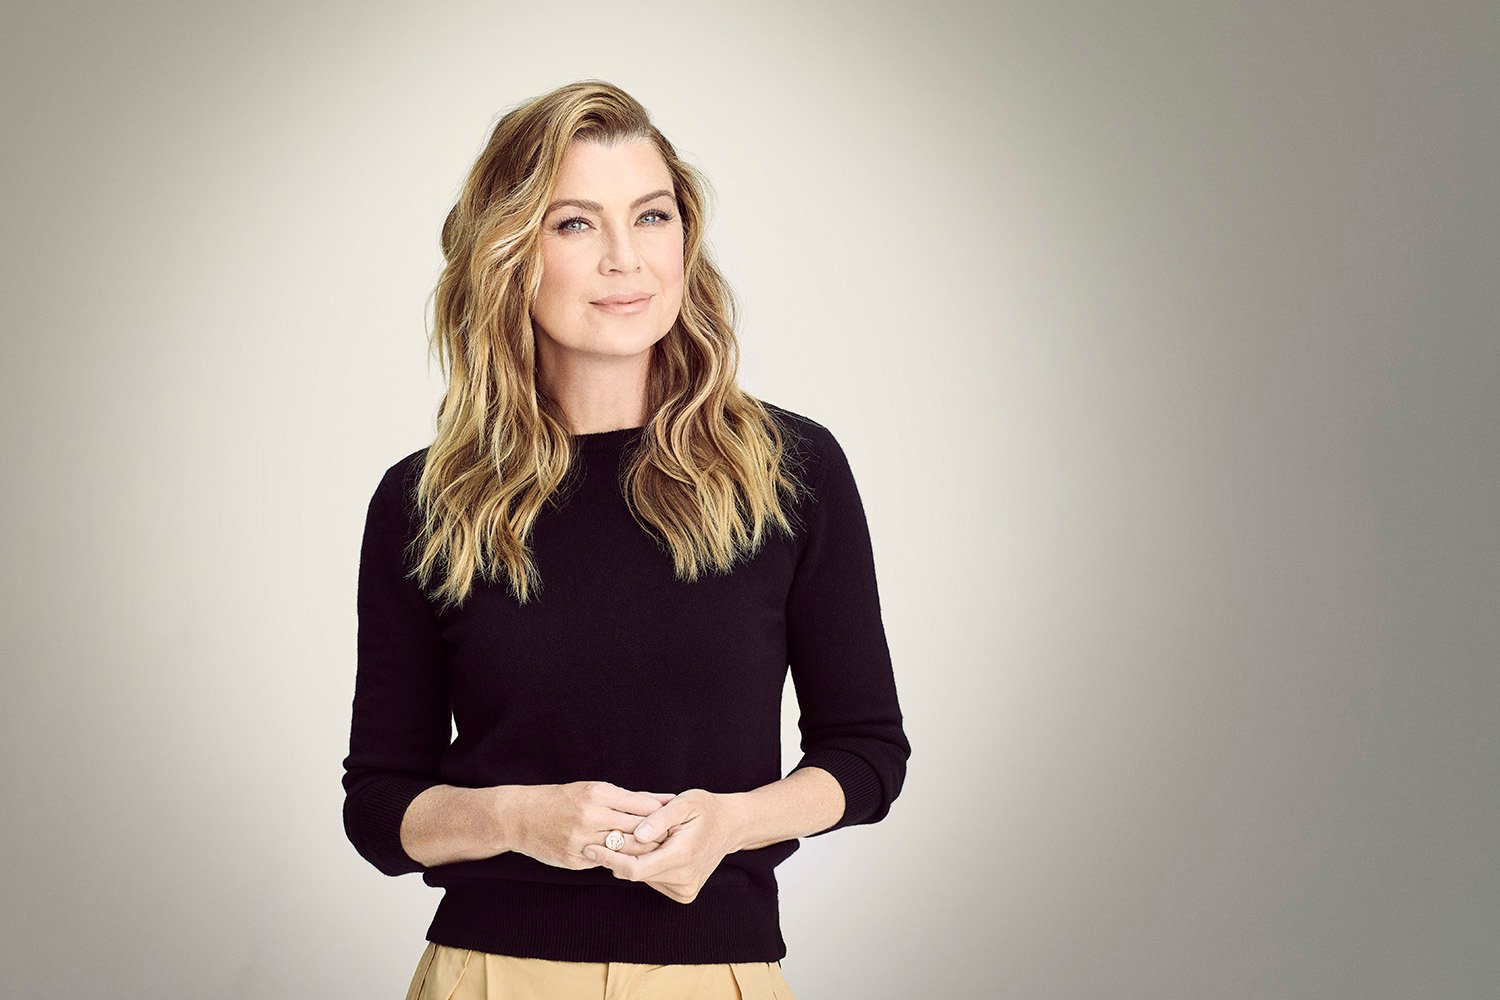 Grey's Anatomy star Ellen Pompeo wearing a black top and beige pants and wearing her blonde hair down. She's standing in front of a solid grey background and staring at the camera.